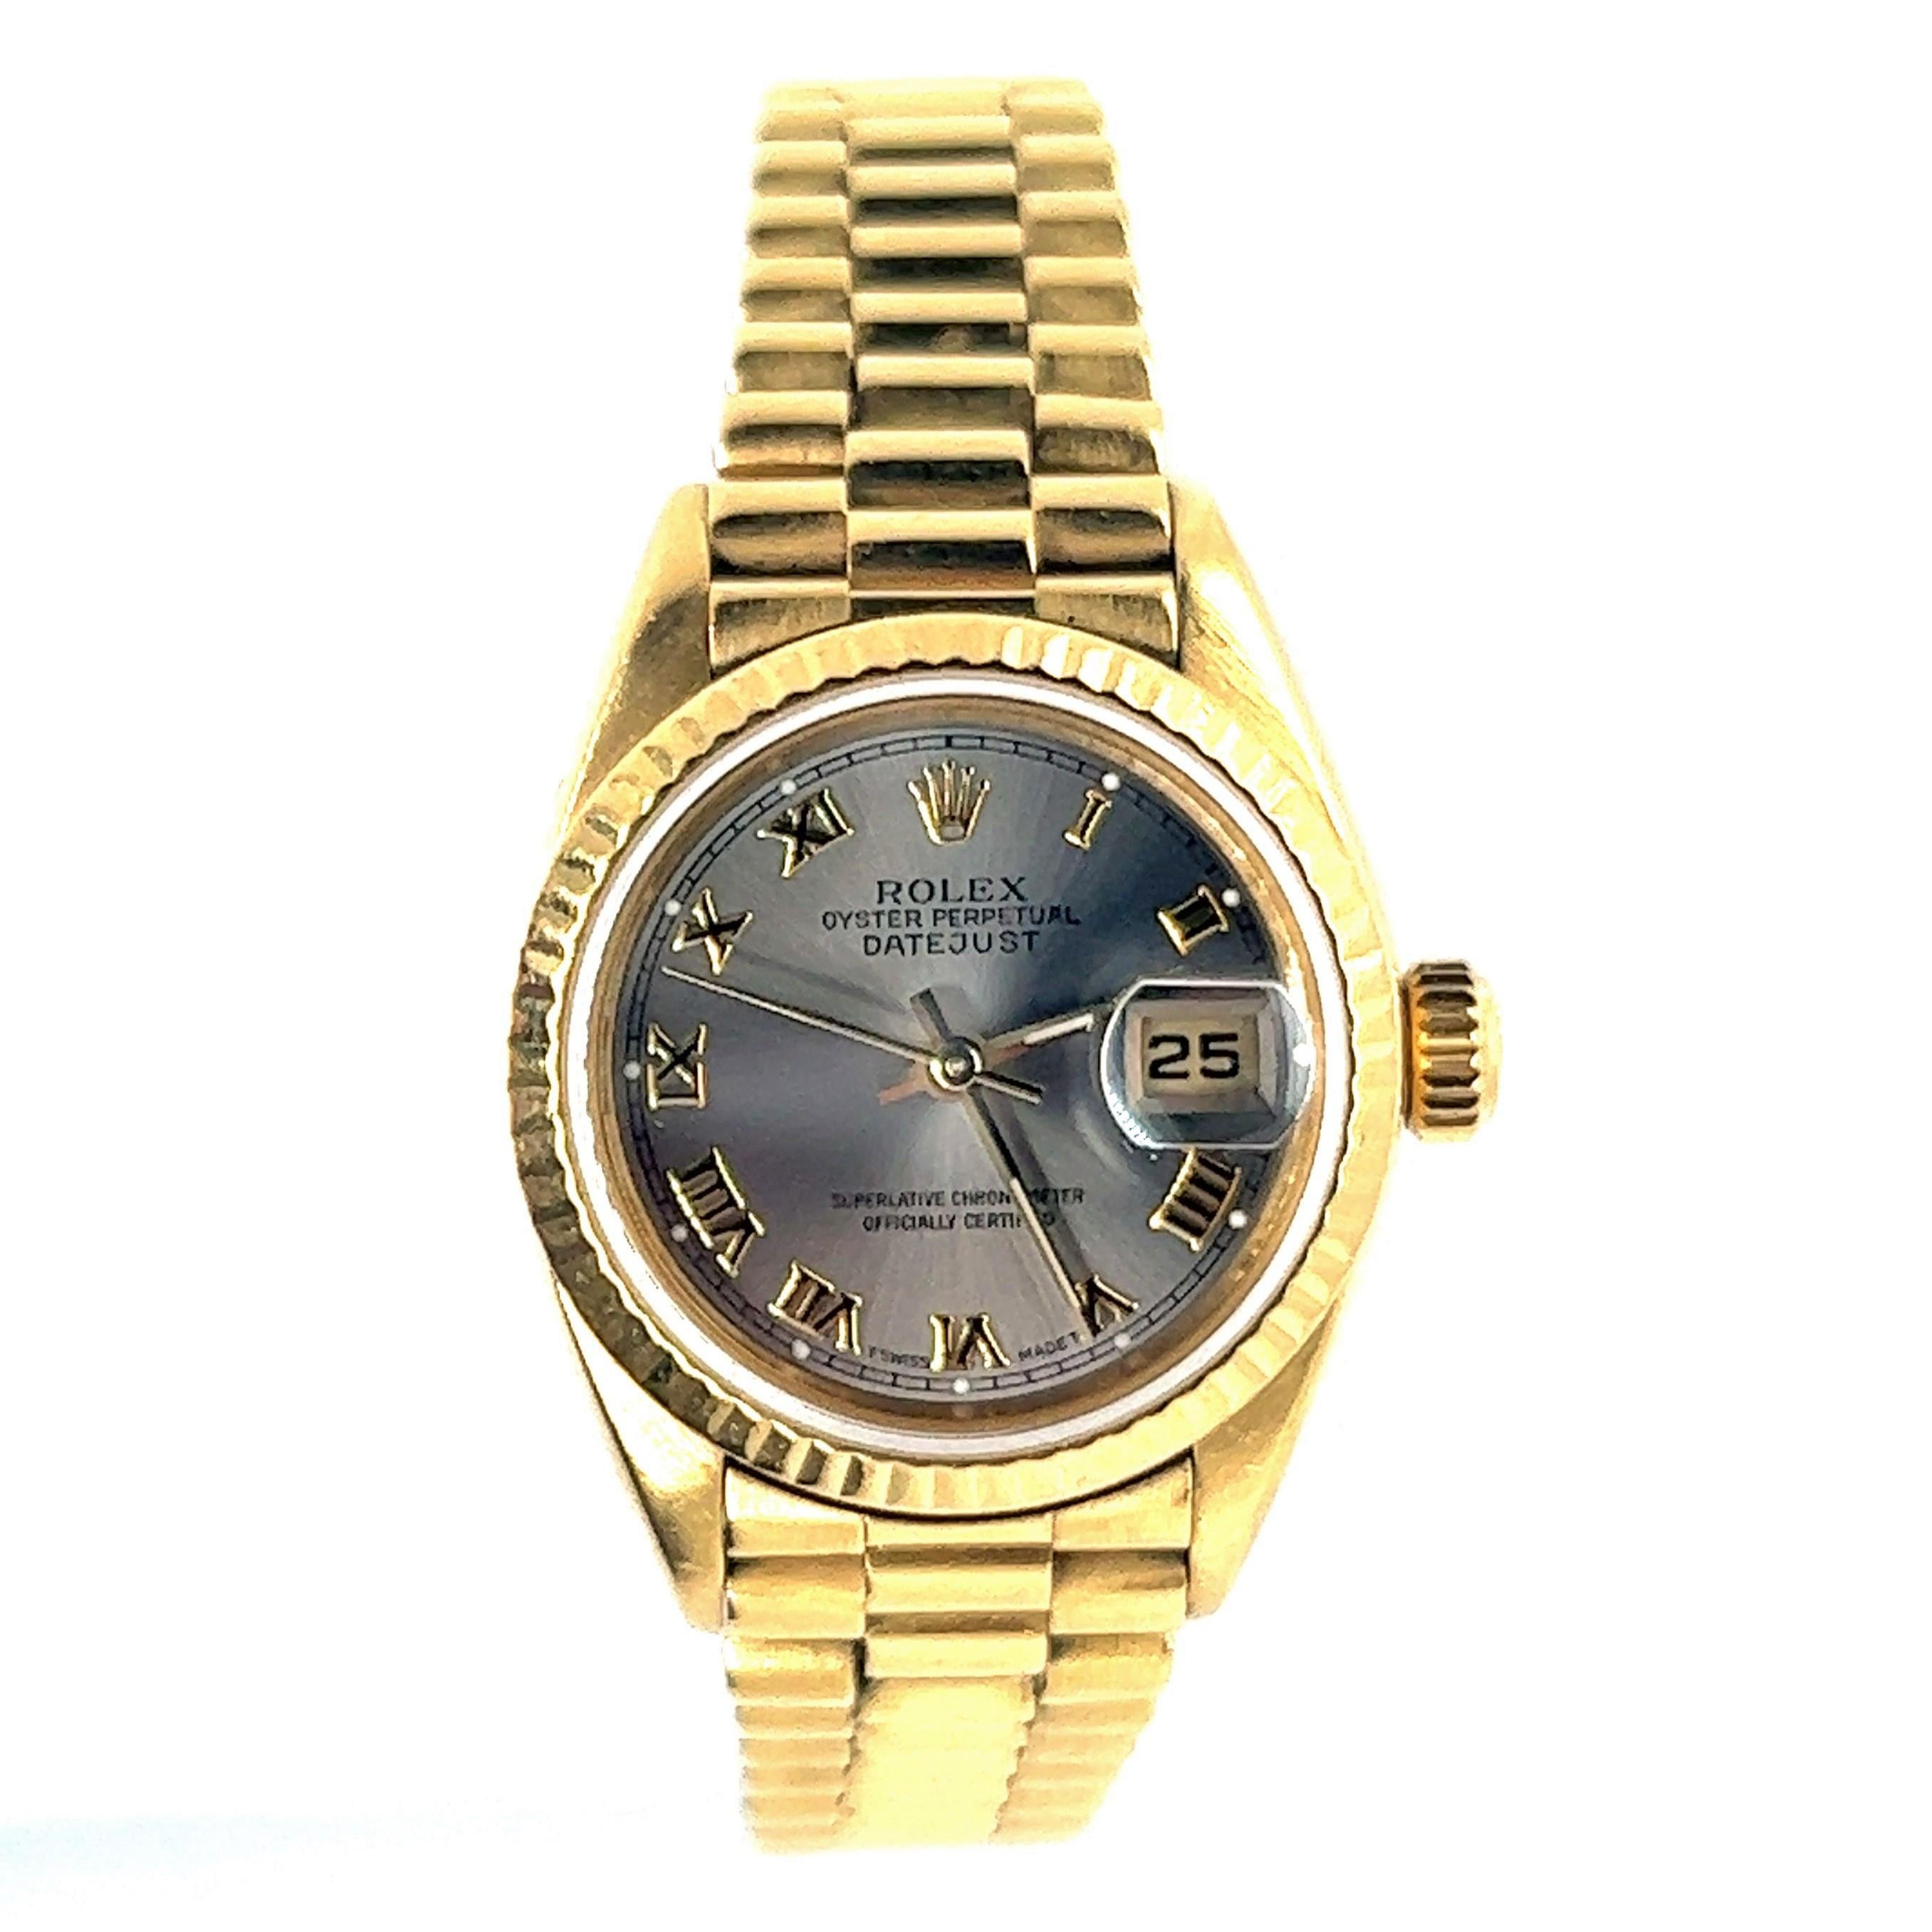 Rolex Datejust is considered as a perfect example of Swiss precision that comes together with a graceful design. Its simplicity and elegance is a world classic among wristwatches. 

Crafted from fine 18 Karat yellow gold, this model has an Oyster